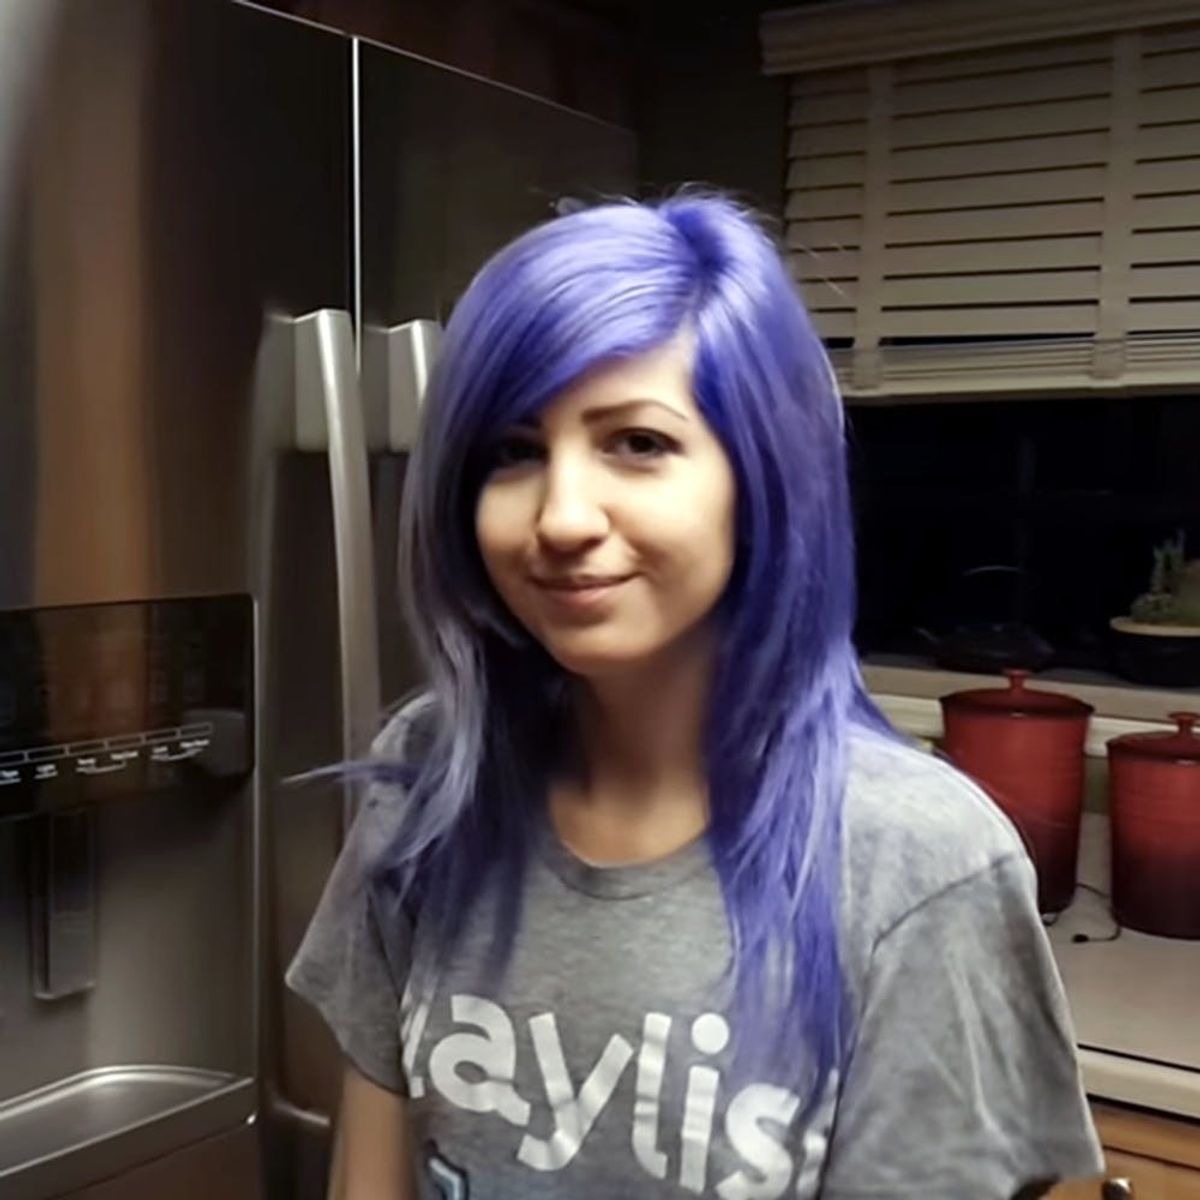 This Color Changing Hair Video Is the New #TheDress